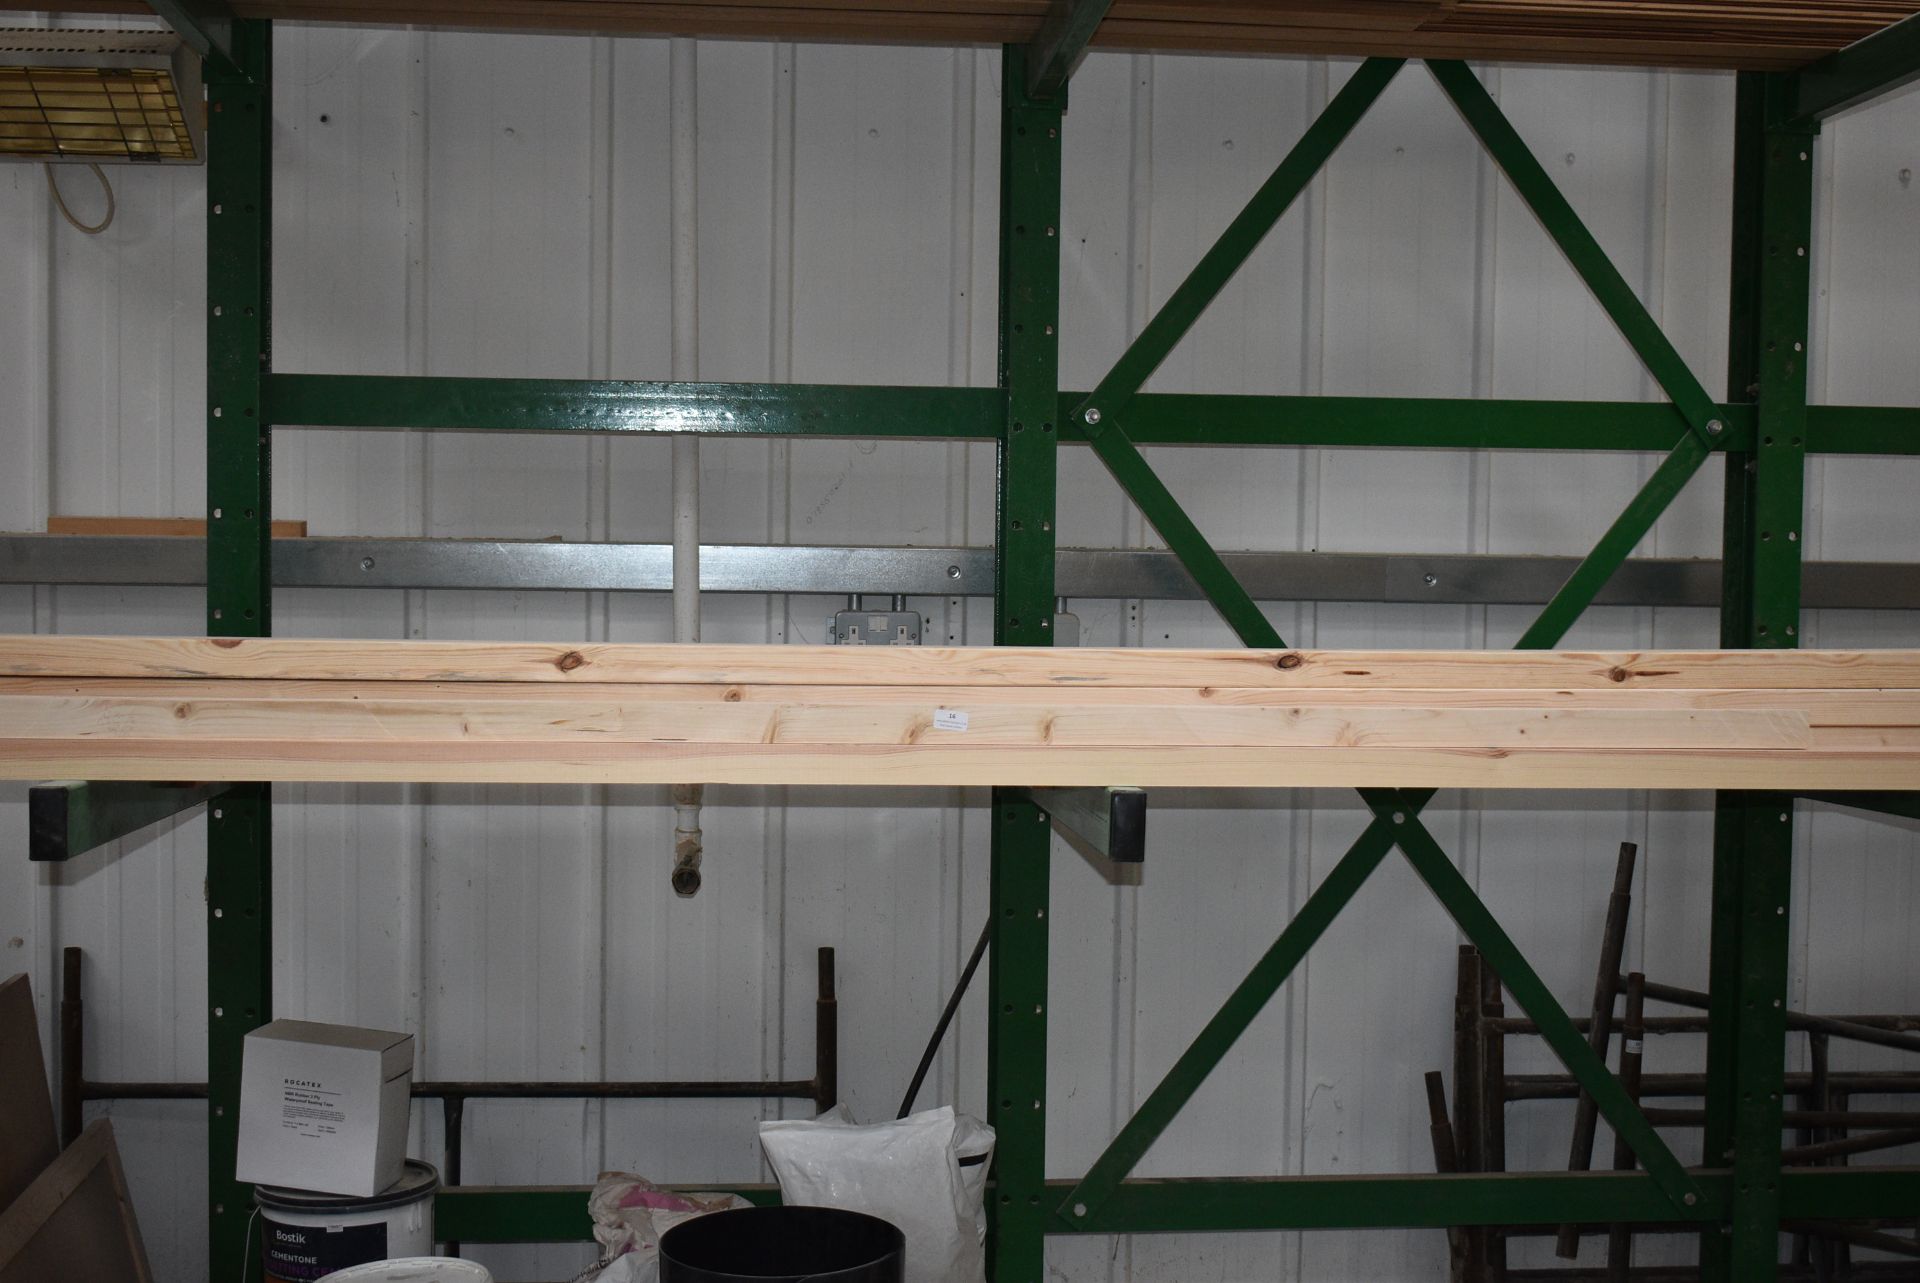 *Contents of Bottom Shelf to Include Extruded Aluminium, 2x4 Timbers, PSE, Timber, etc. - Image 2 of 4